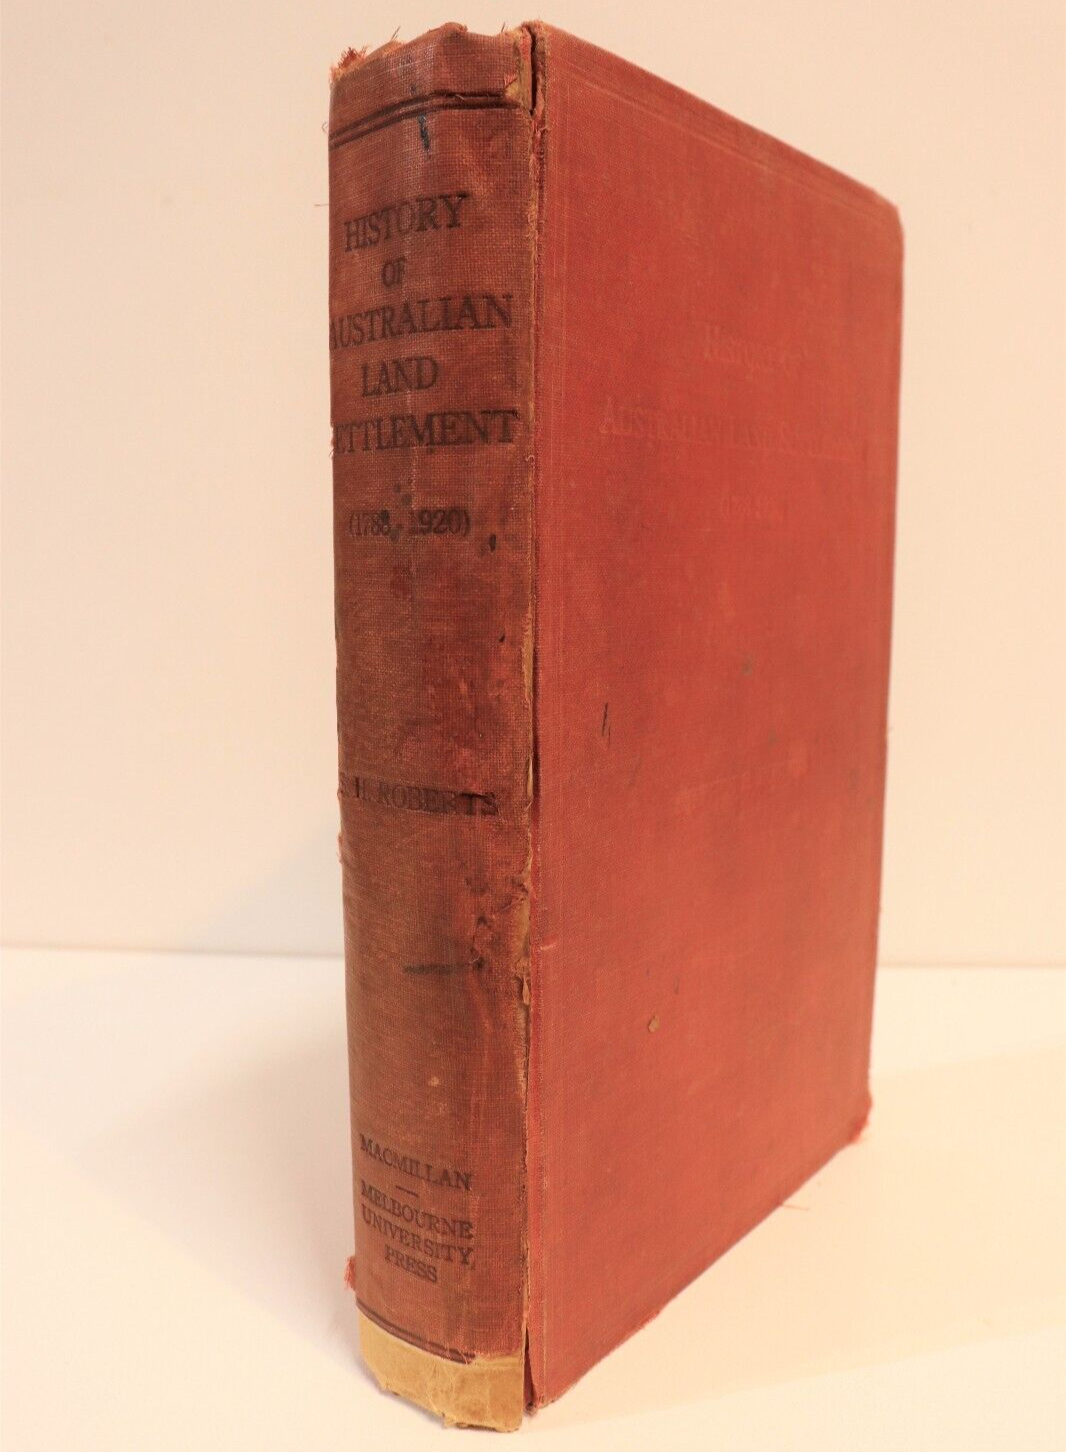 1924 History Of Australian Land Settlement 1788 to 1920 Antique History Book